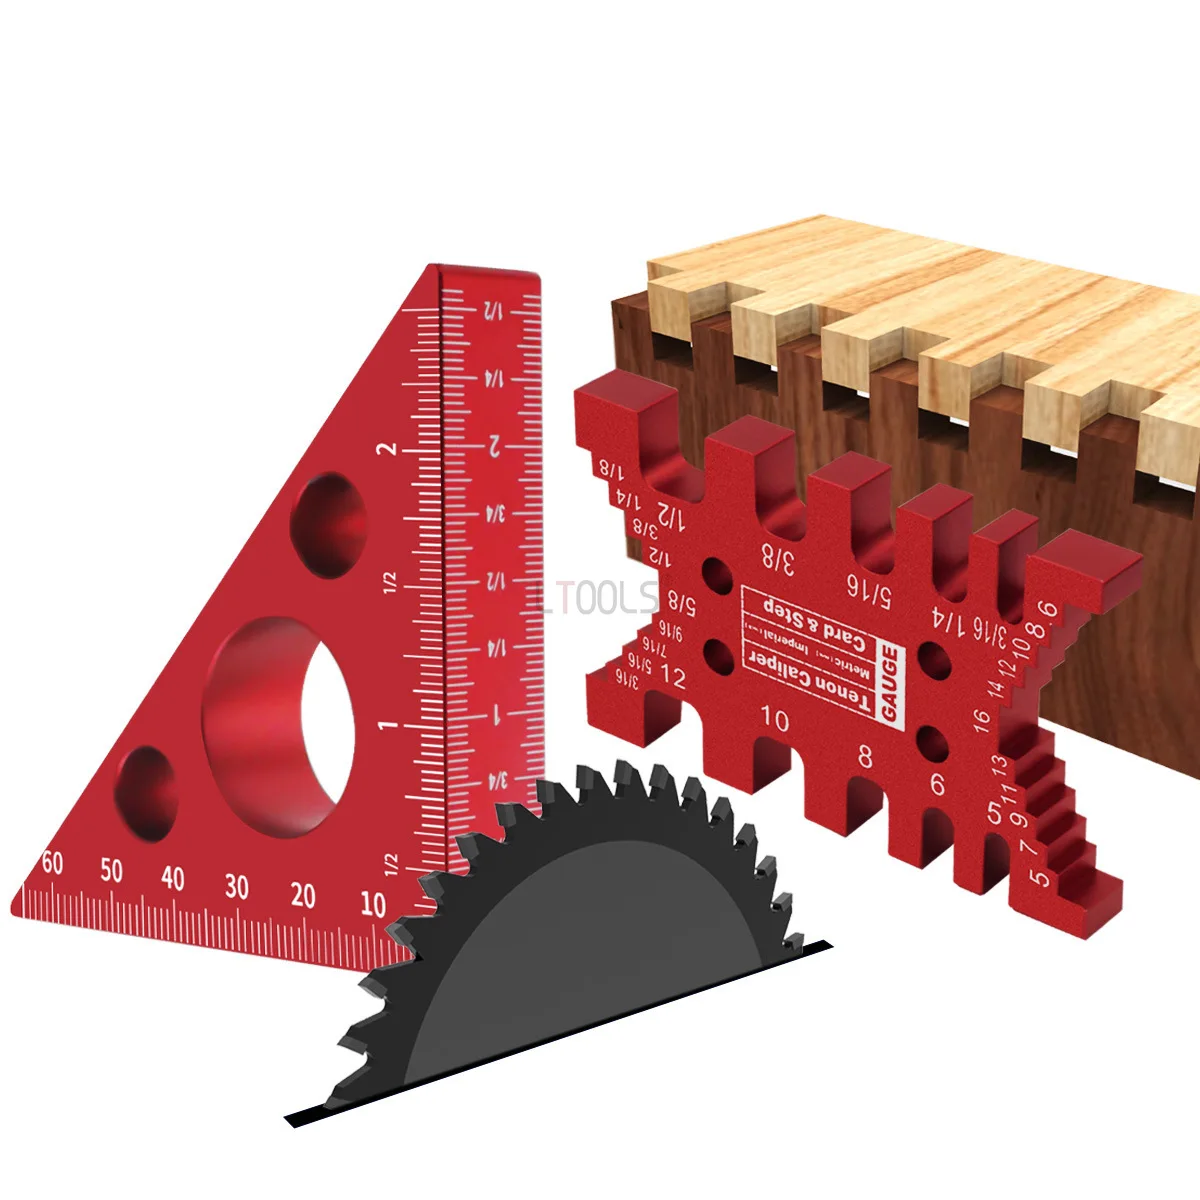 Dovetail Jig Tenon Caliper+Thickened Heigh 45/90° Scale Imperial Metric Degree Aluminum Alloy Triangle Ruler Measuring Tool new woodworking center scriber square center scriber ruler right angle scribers accurate scale woodworking measuring tool diy